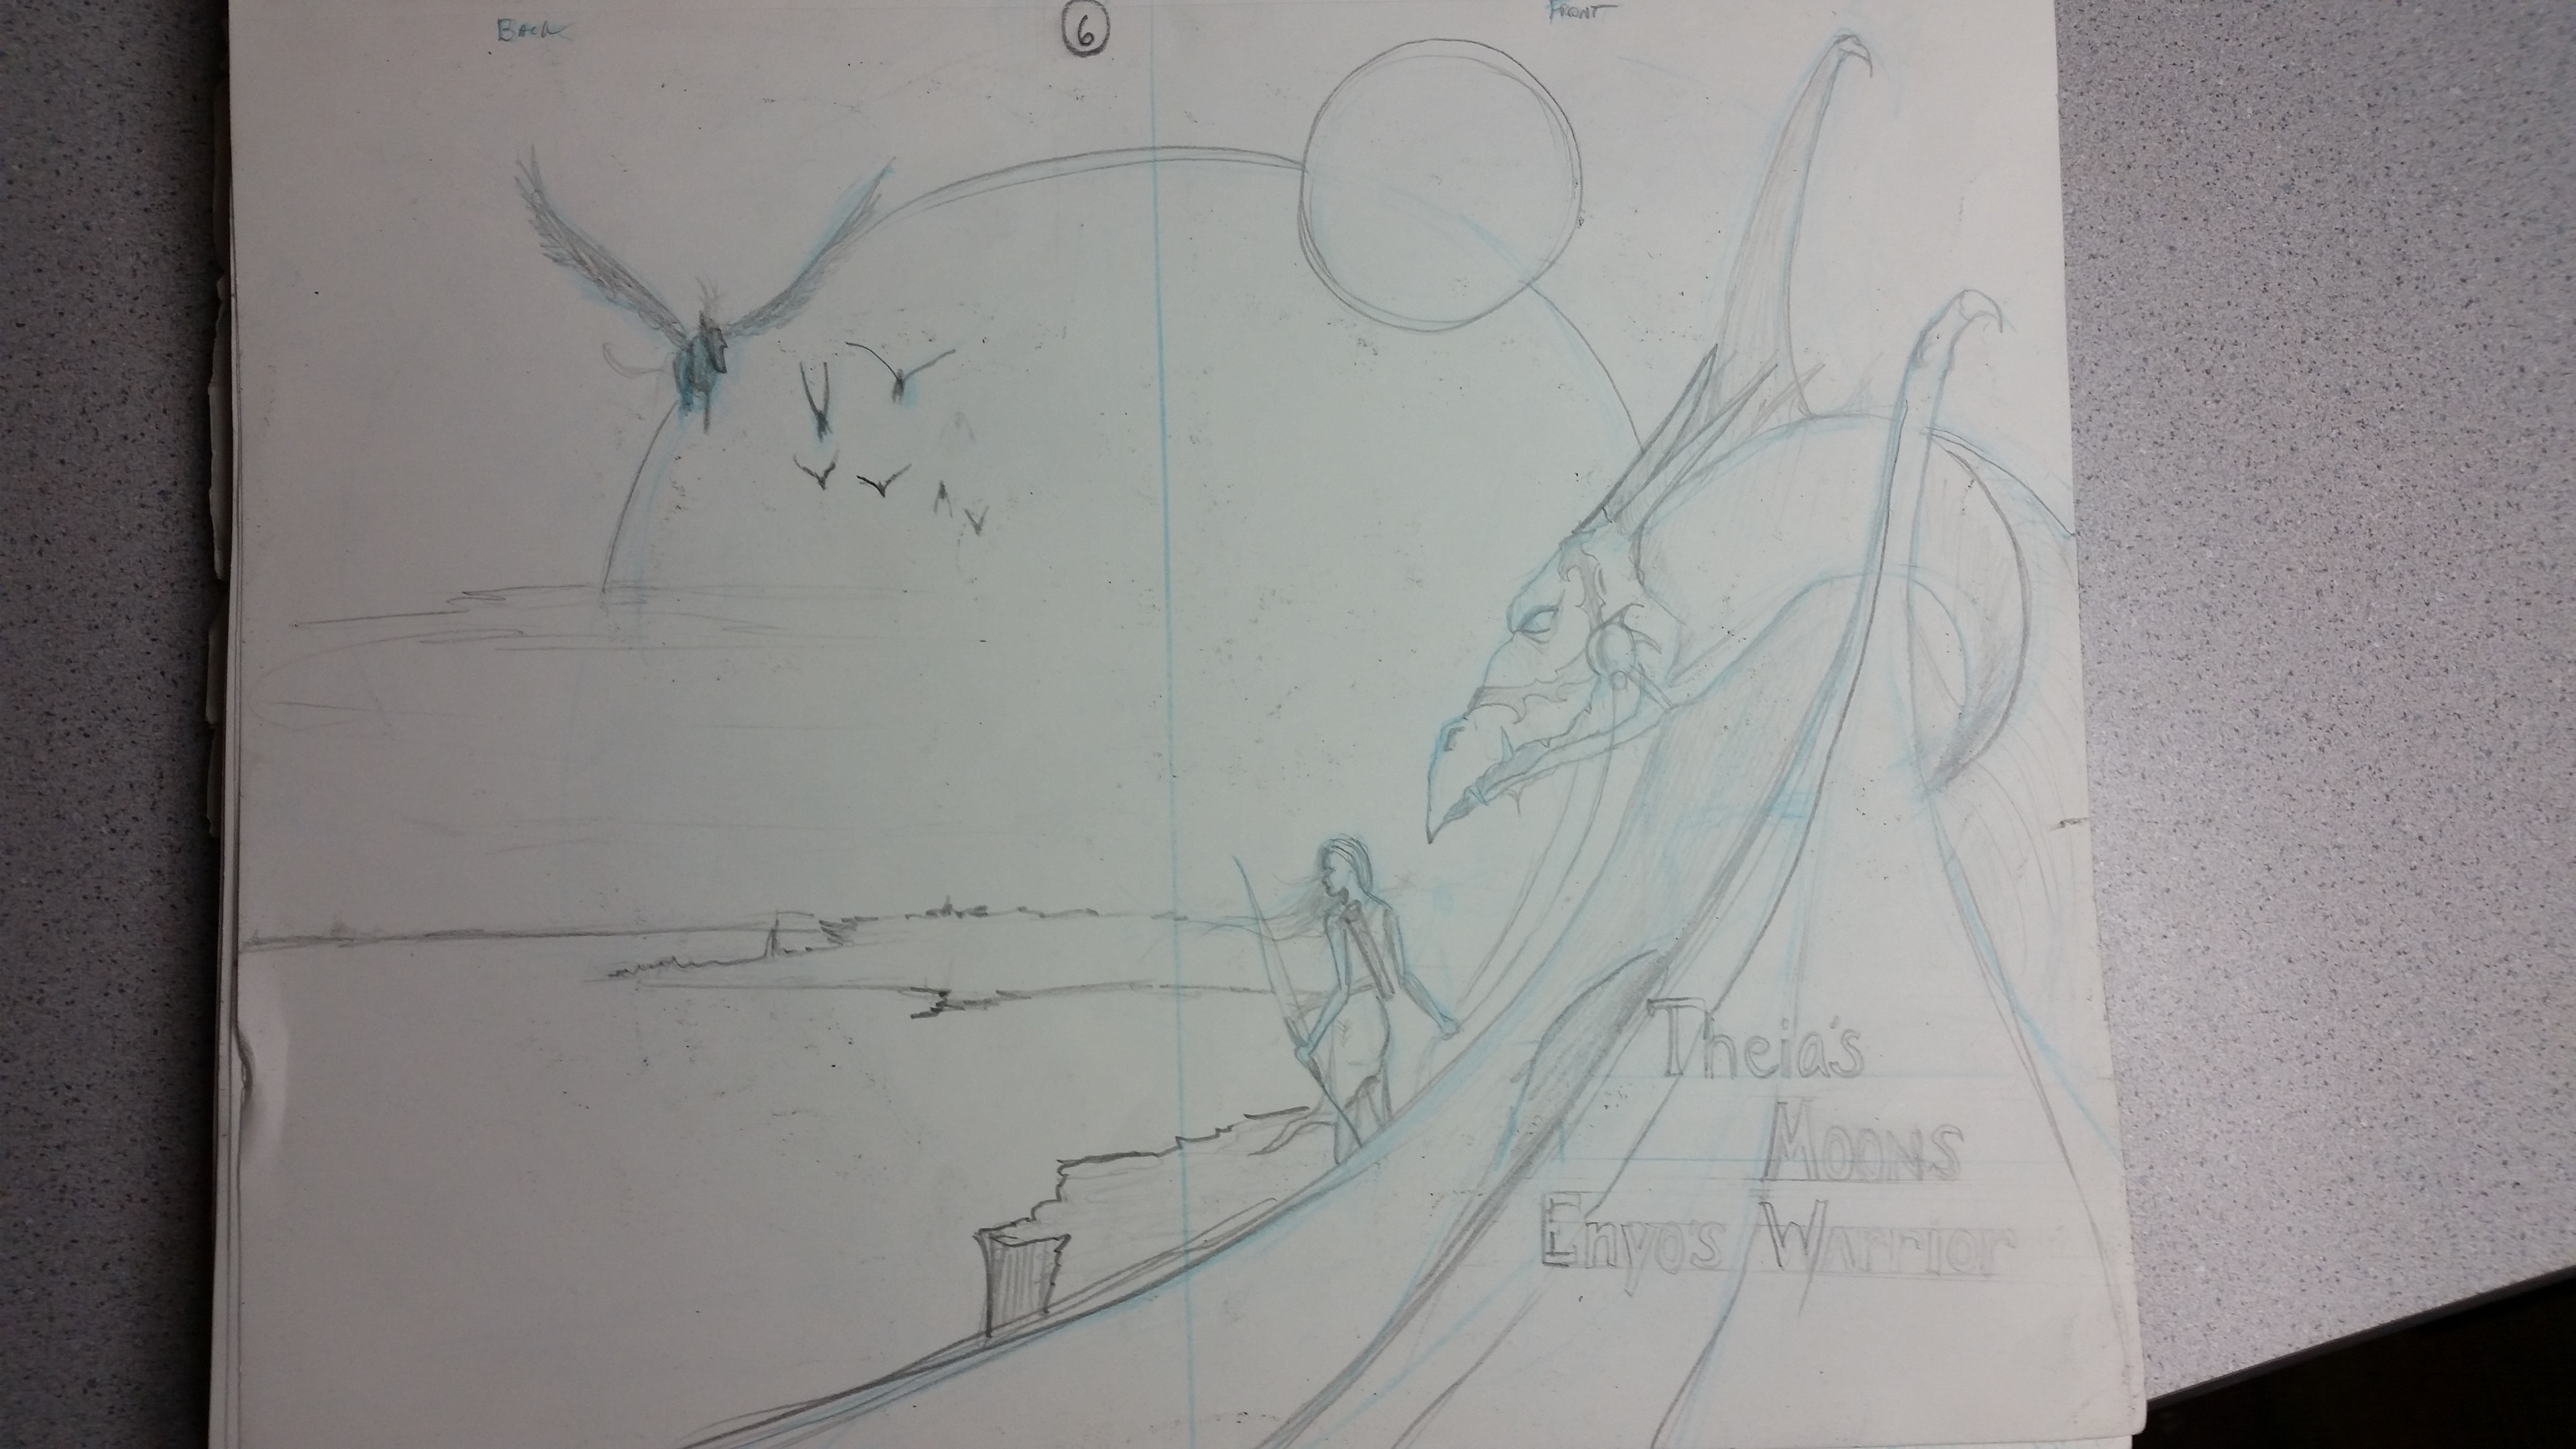 Sketch of book cover ideas and concepts for Theias Moons series